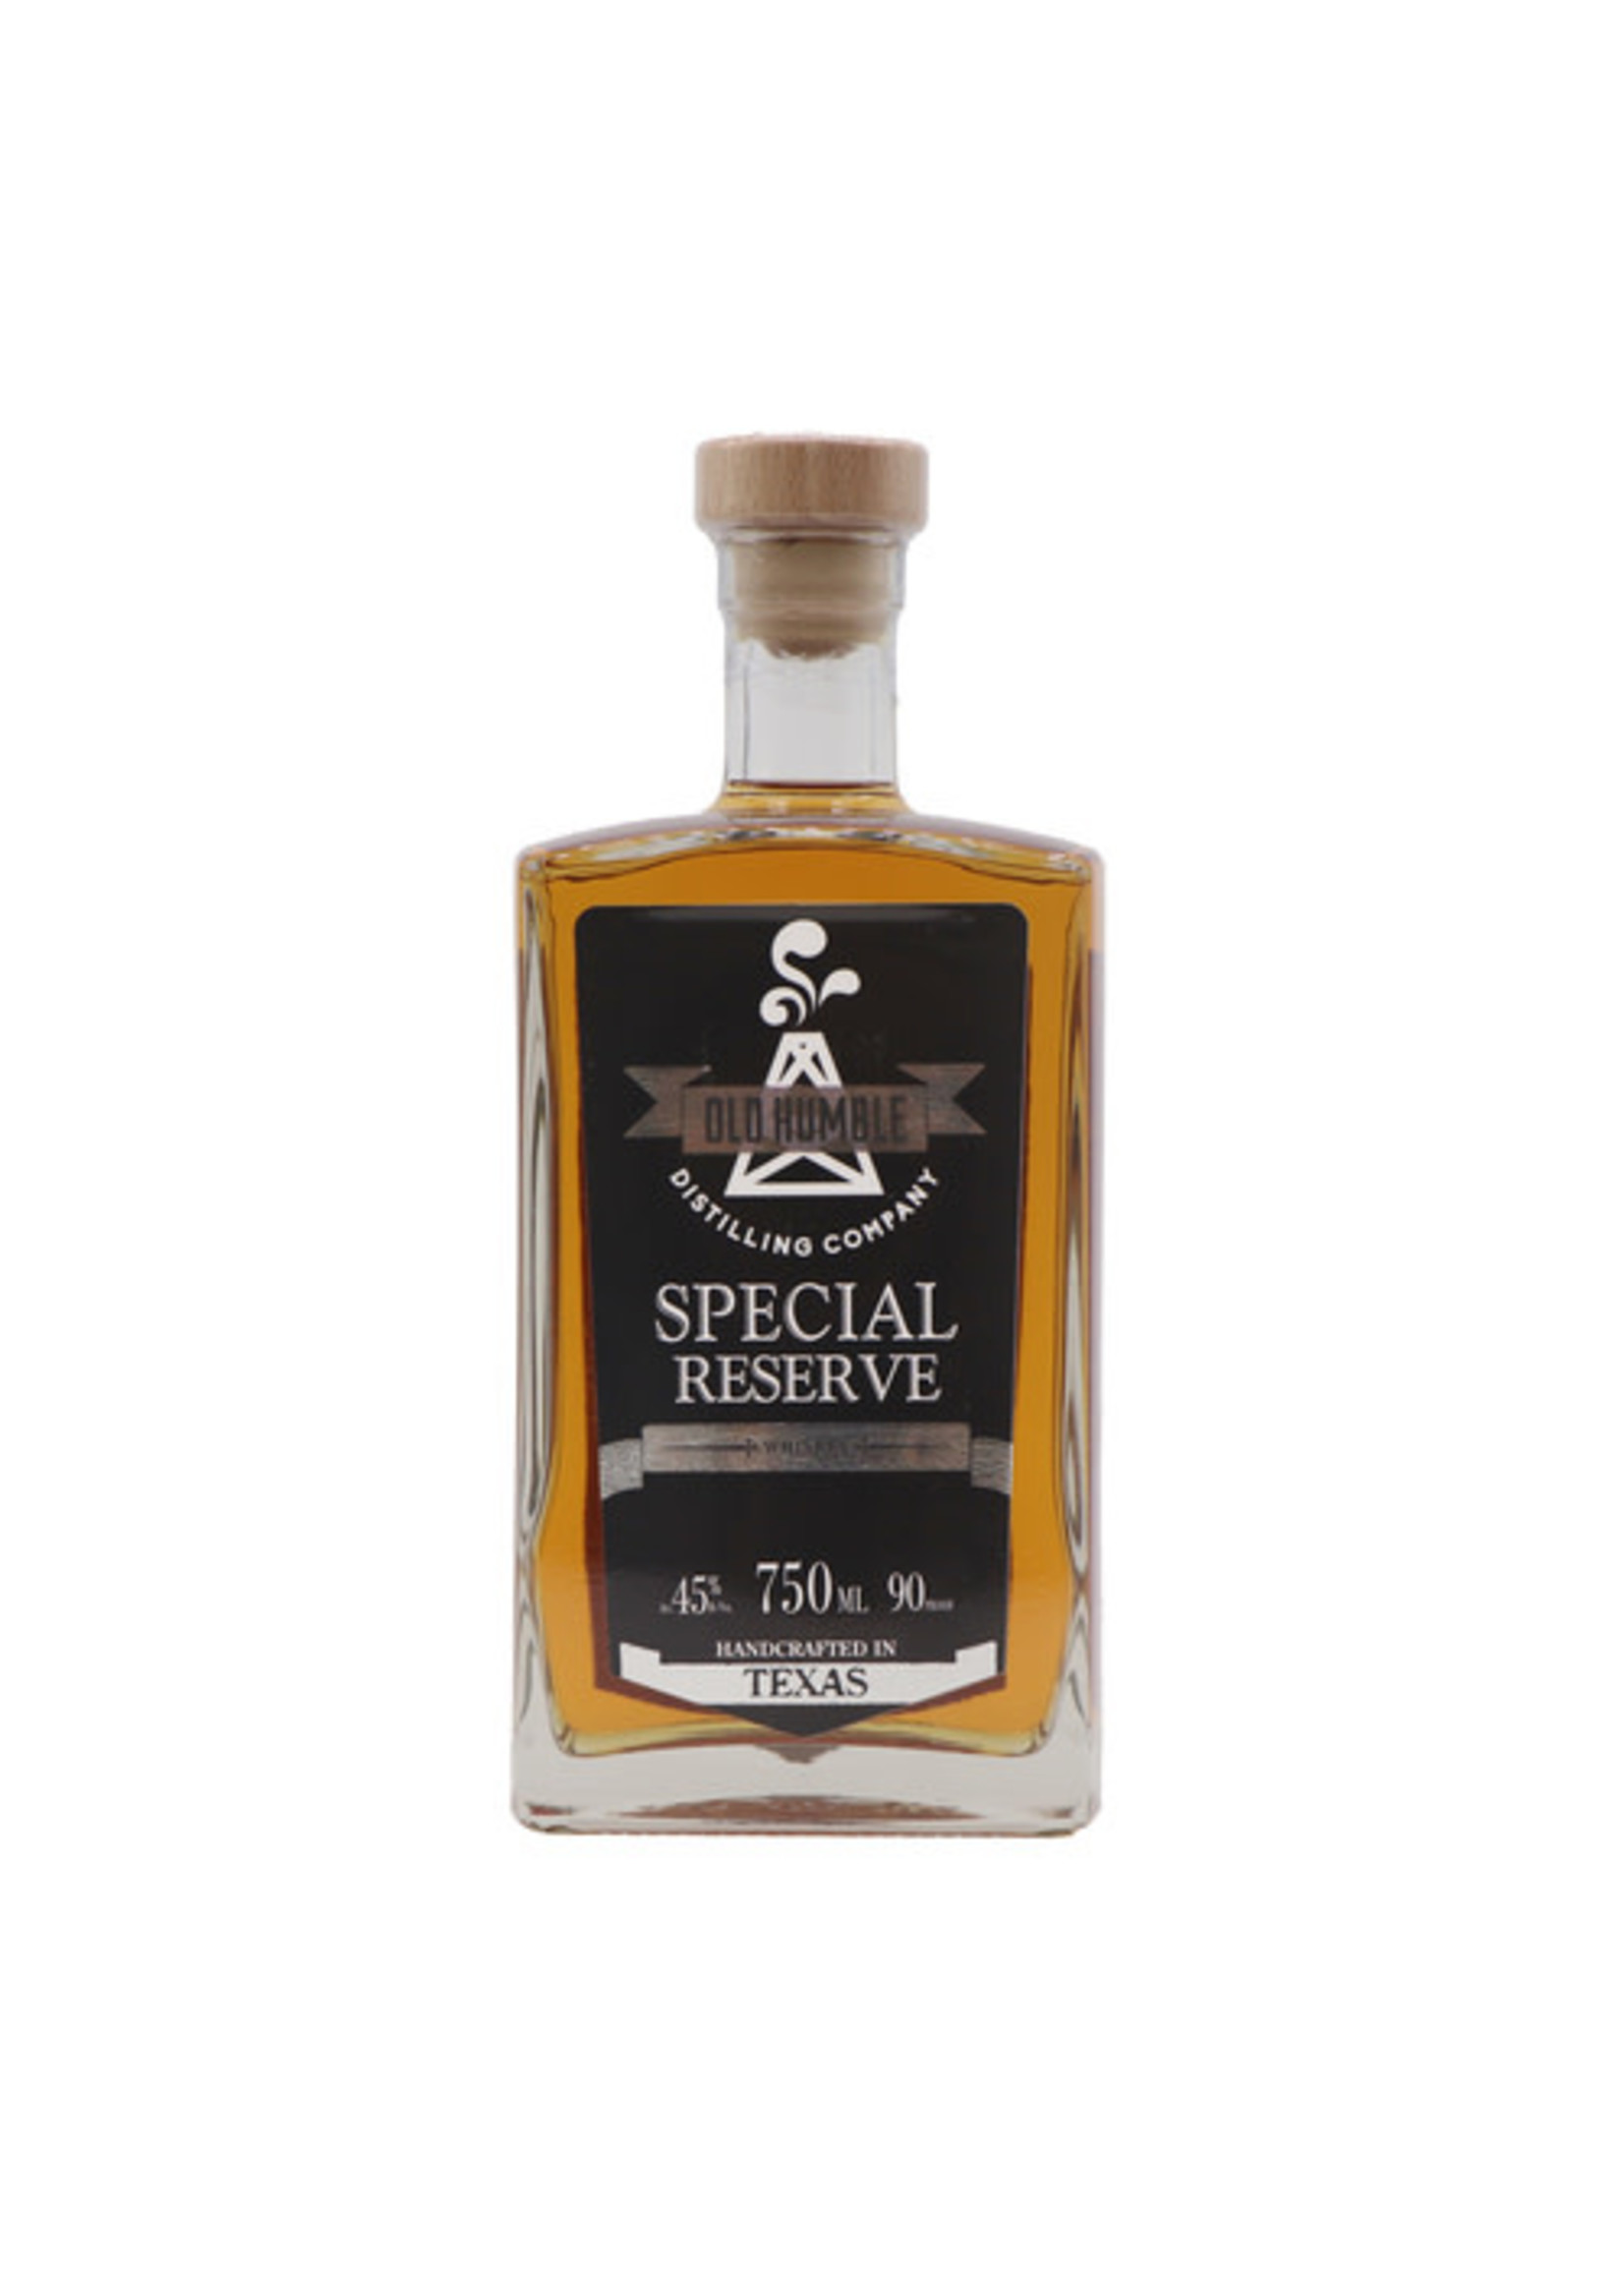 Old Humble Special Reserve 90Proof 750ml